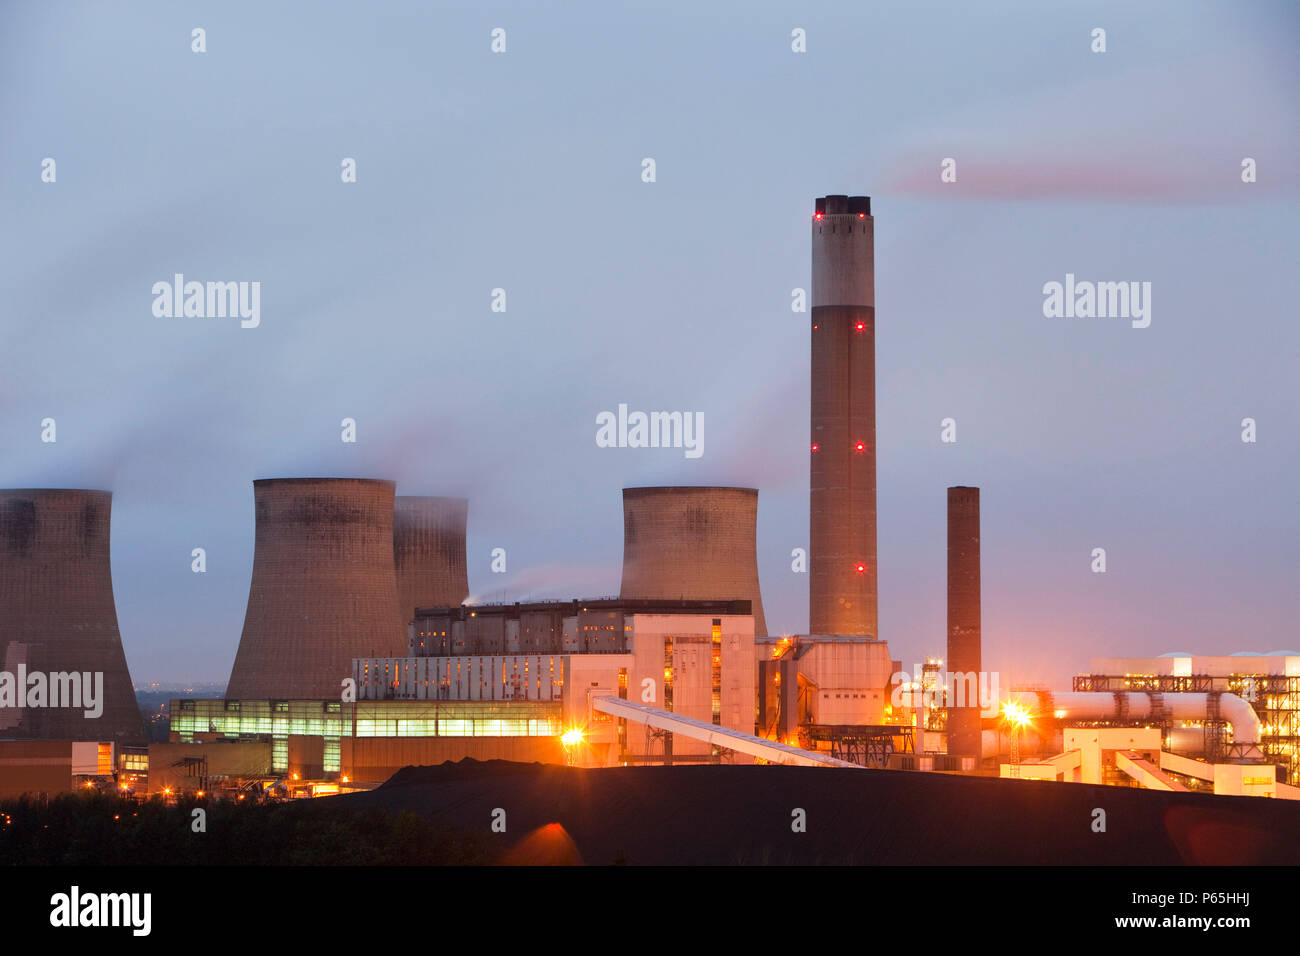 Ratcliffe on Soar coal fired power station at dusk in Leicestershire, UK. Stock Photo